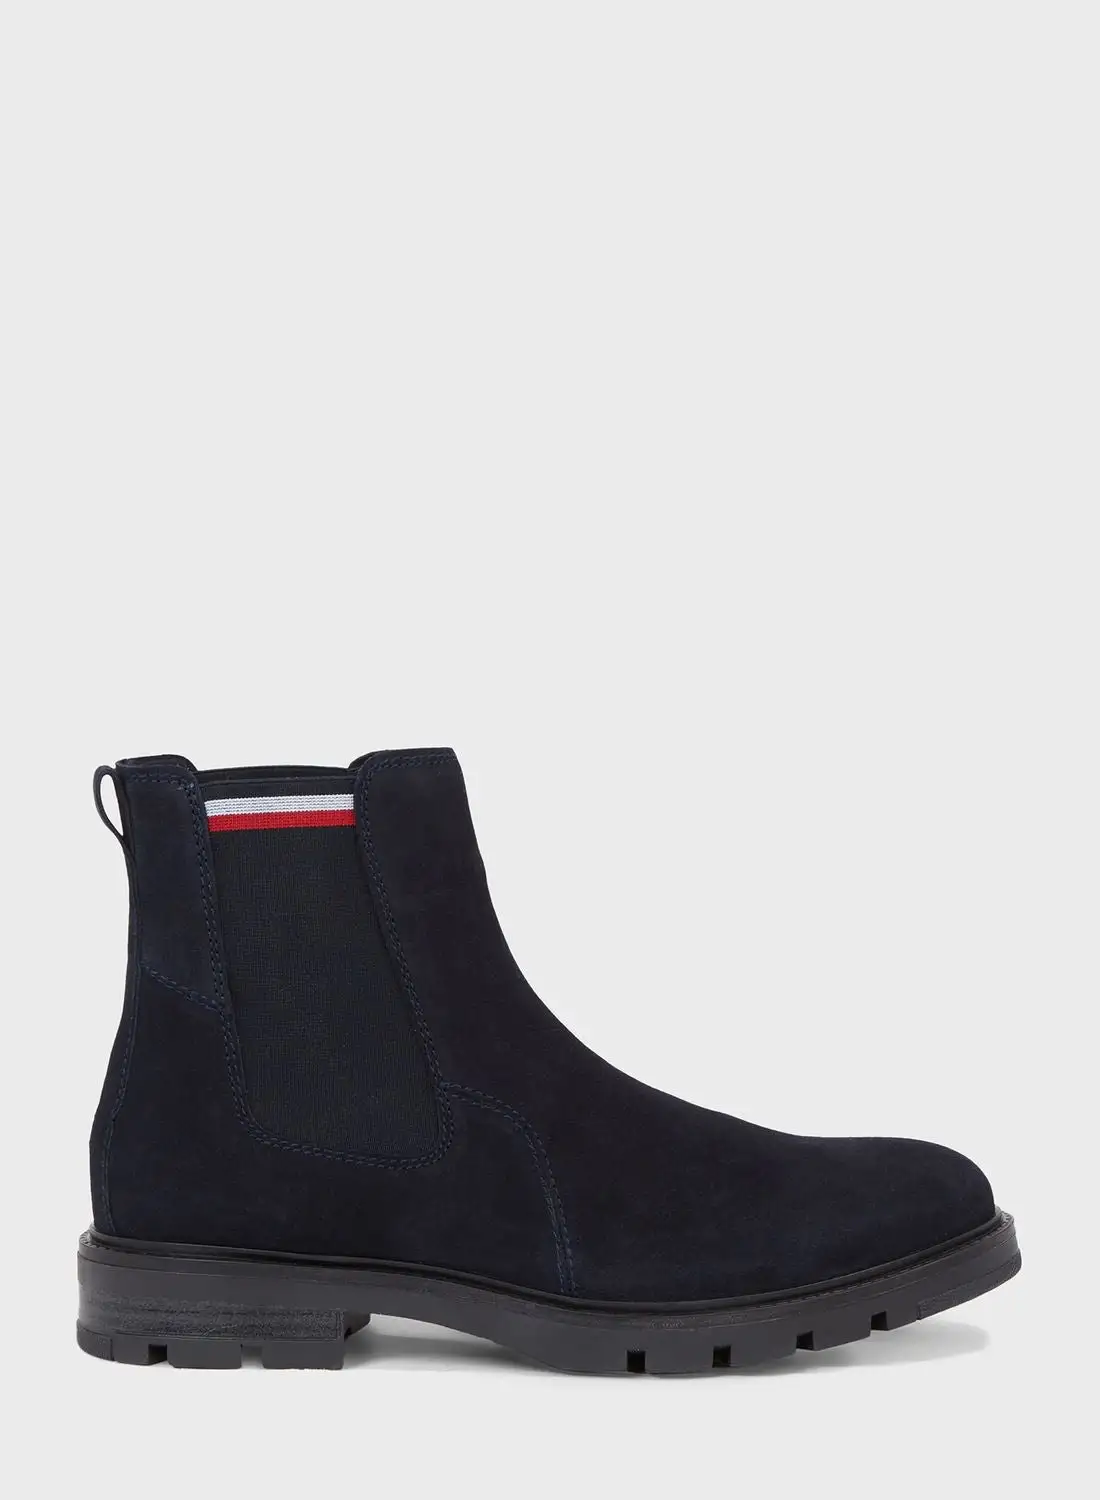 TOMMY HILFIGER Casual Chalsea Boots